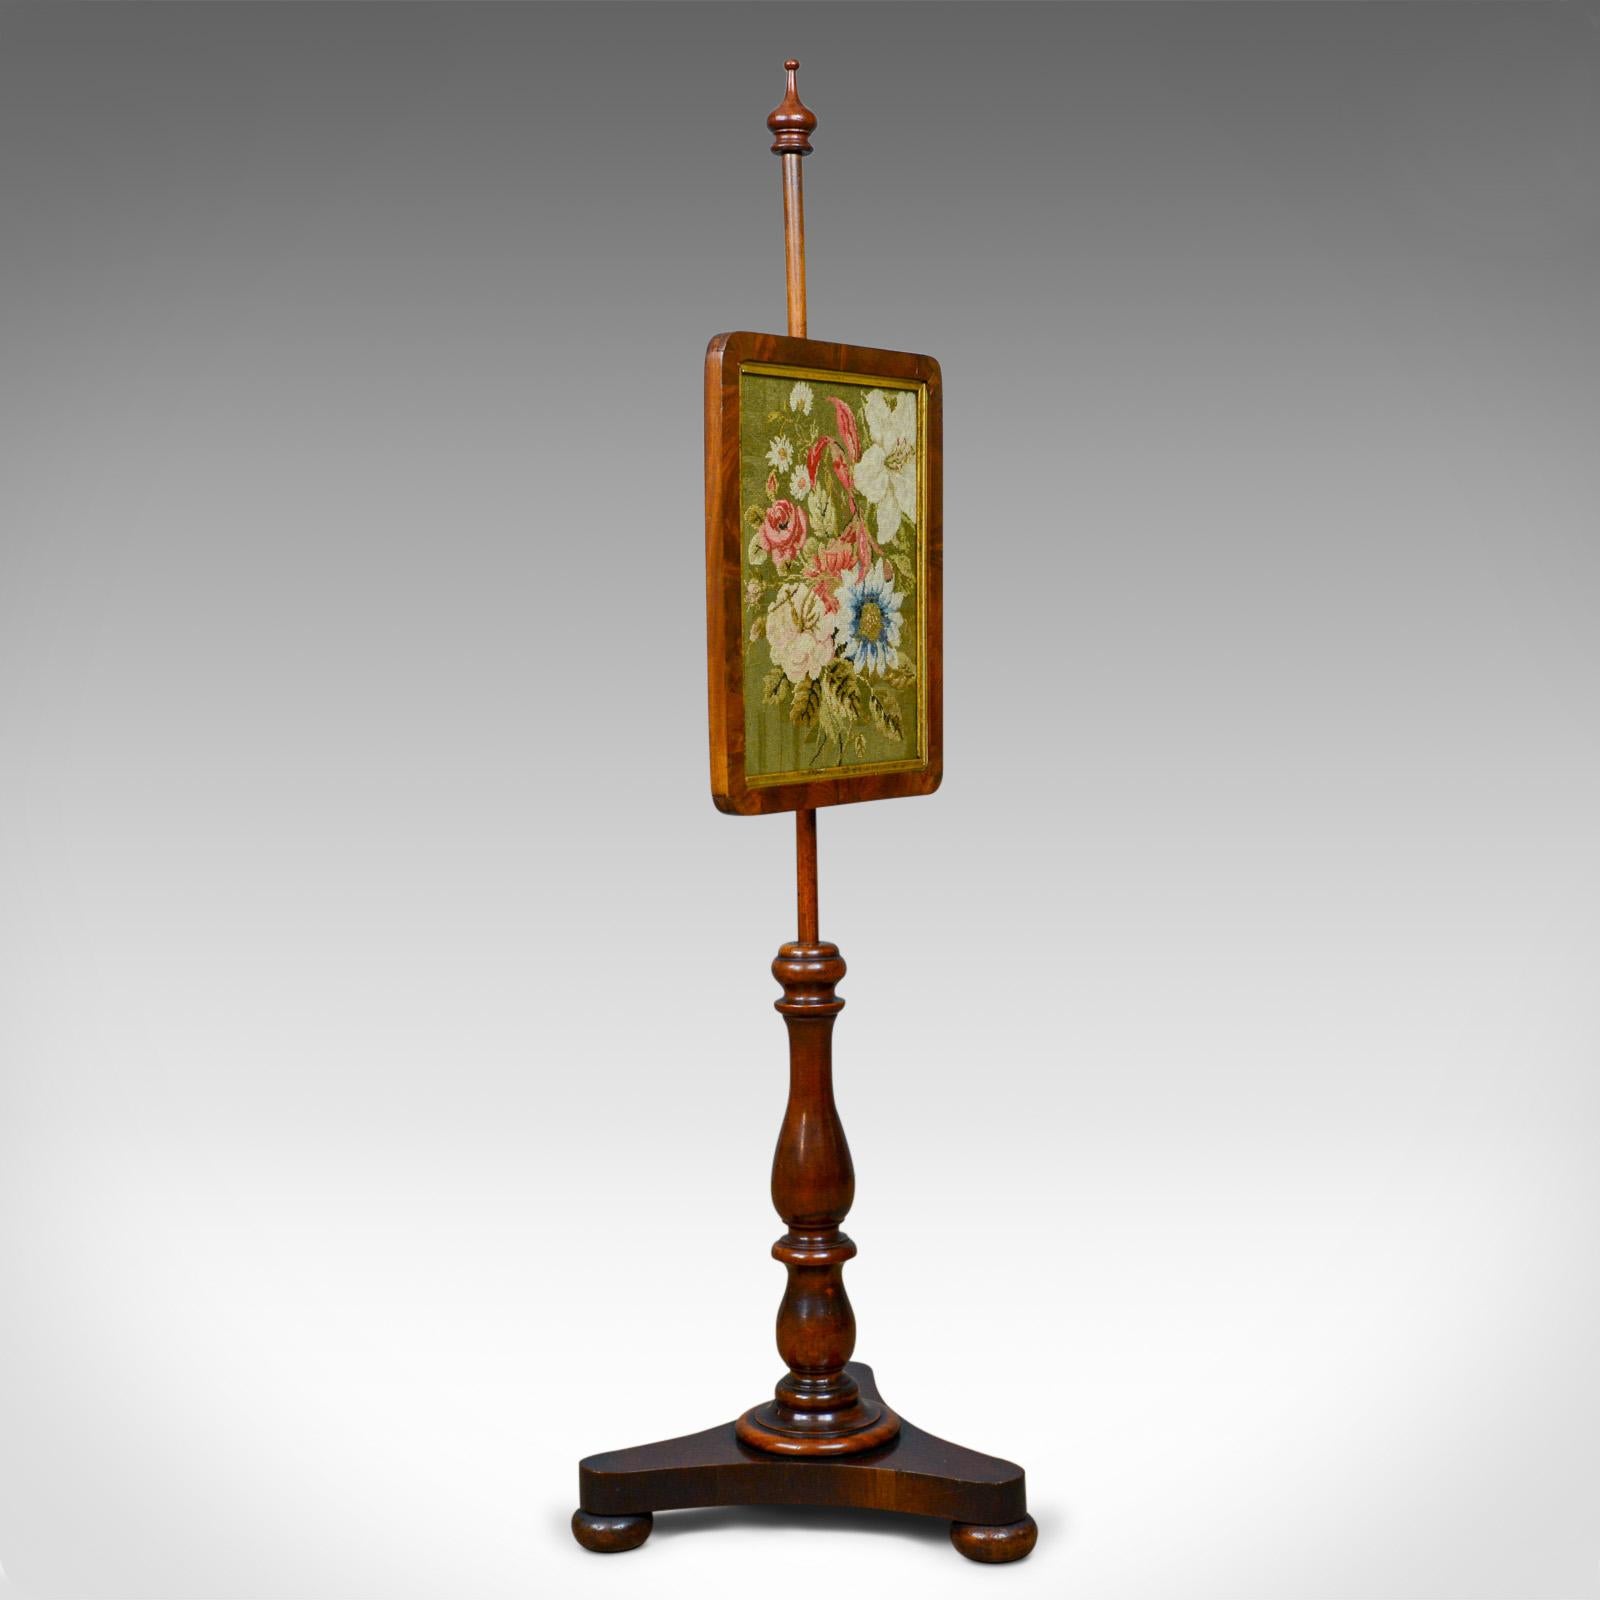 This is an antique pole screen. An English, Regency, walnut fire screen with needlepoint tapestry panel dating to the early 19th century, circa 1820.

The adjustable screen panel is easy to position
Secured in place by a brass thumb screw

An